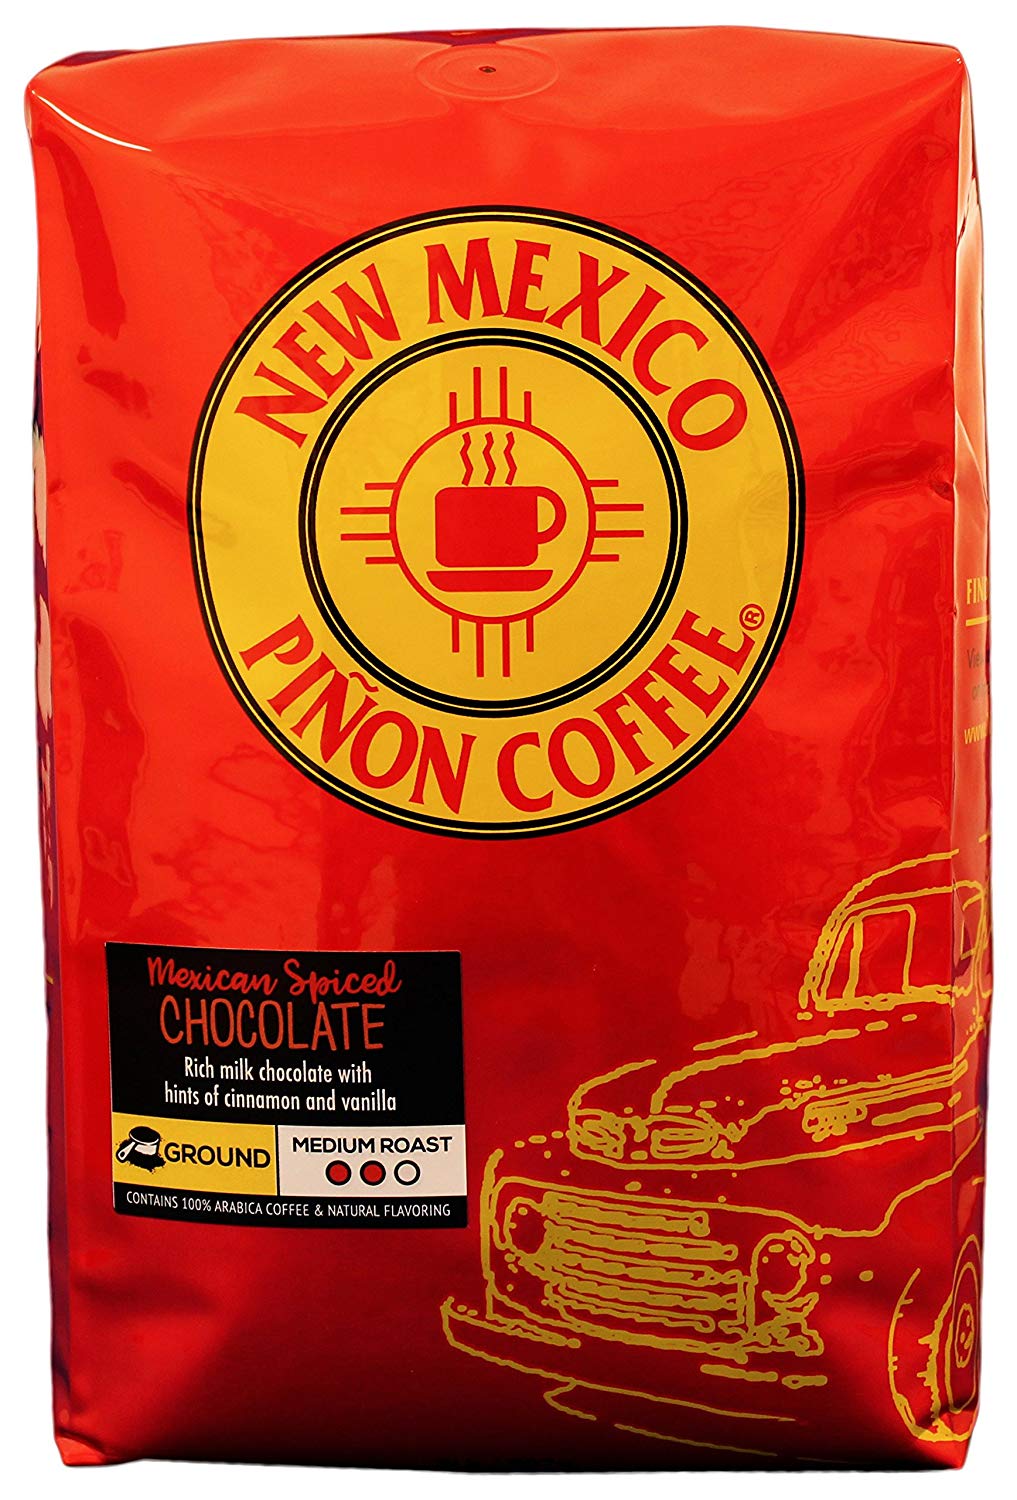 New Mexico Piñon Flavored Coffee - Mexican Spiced Chocolate Ground - 2 pound